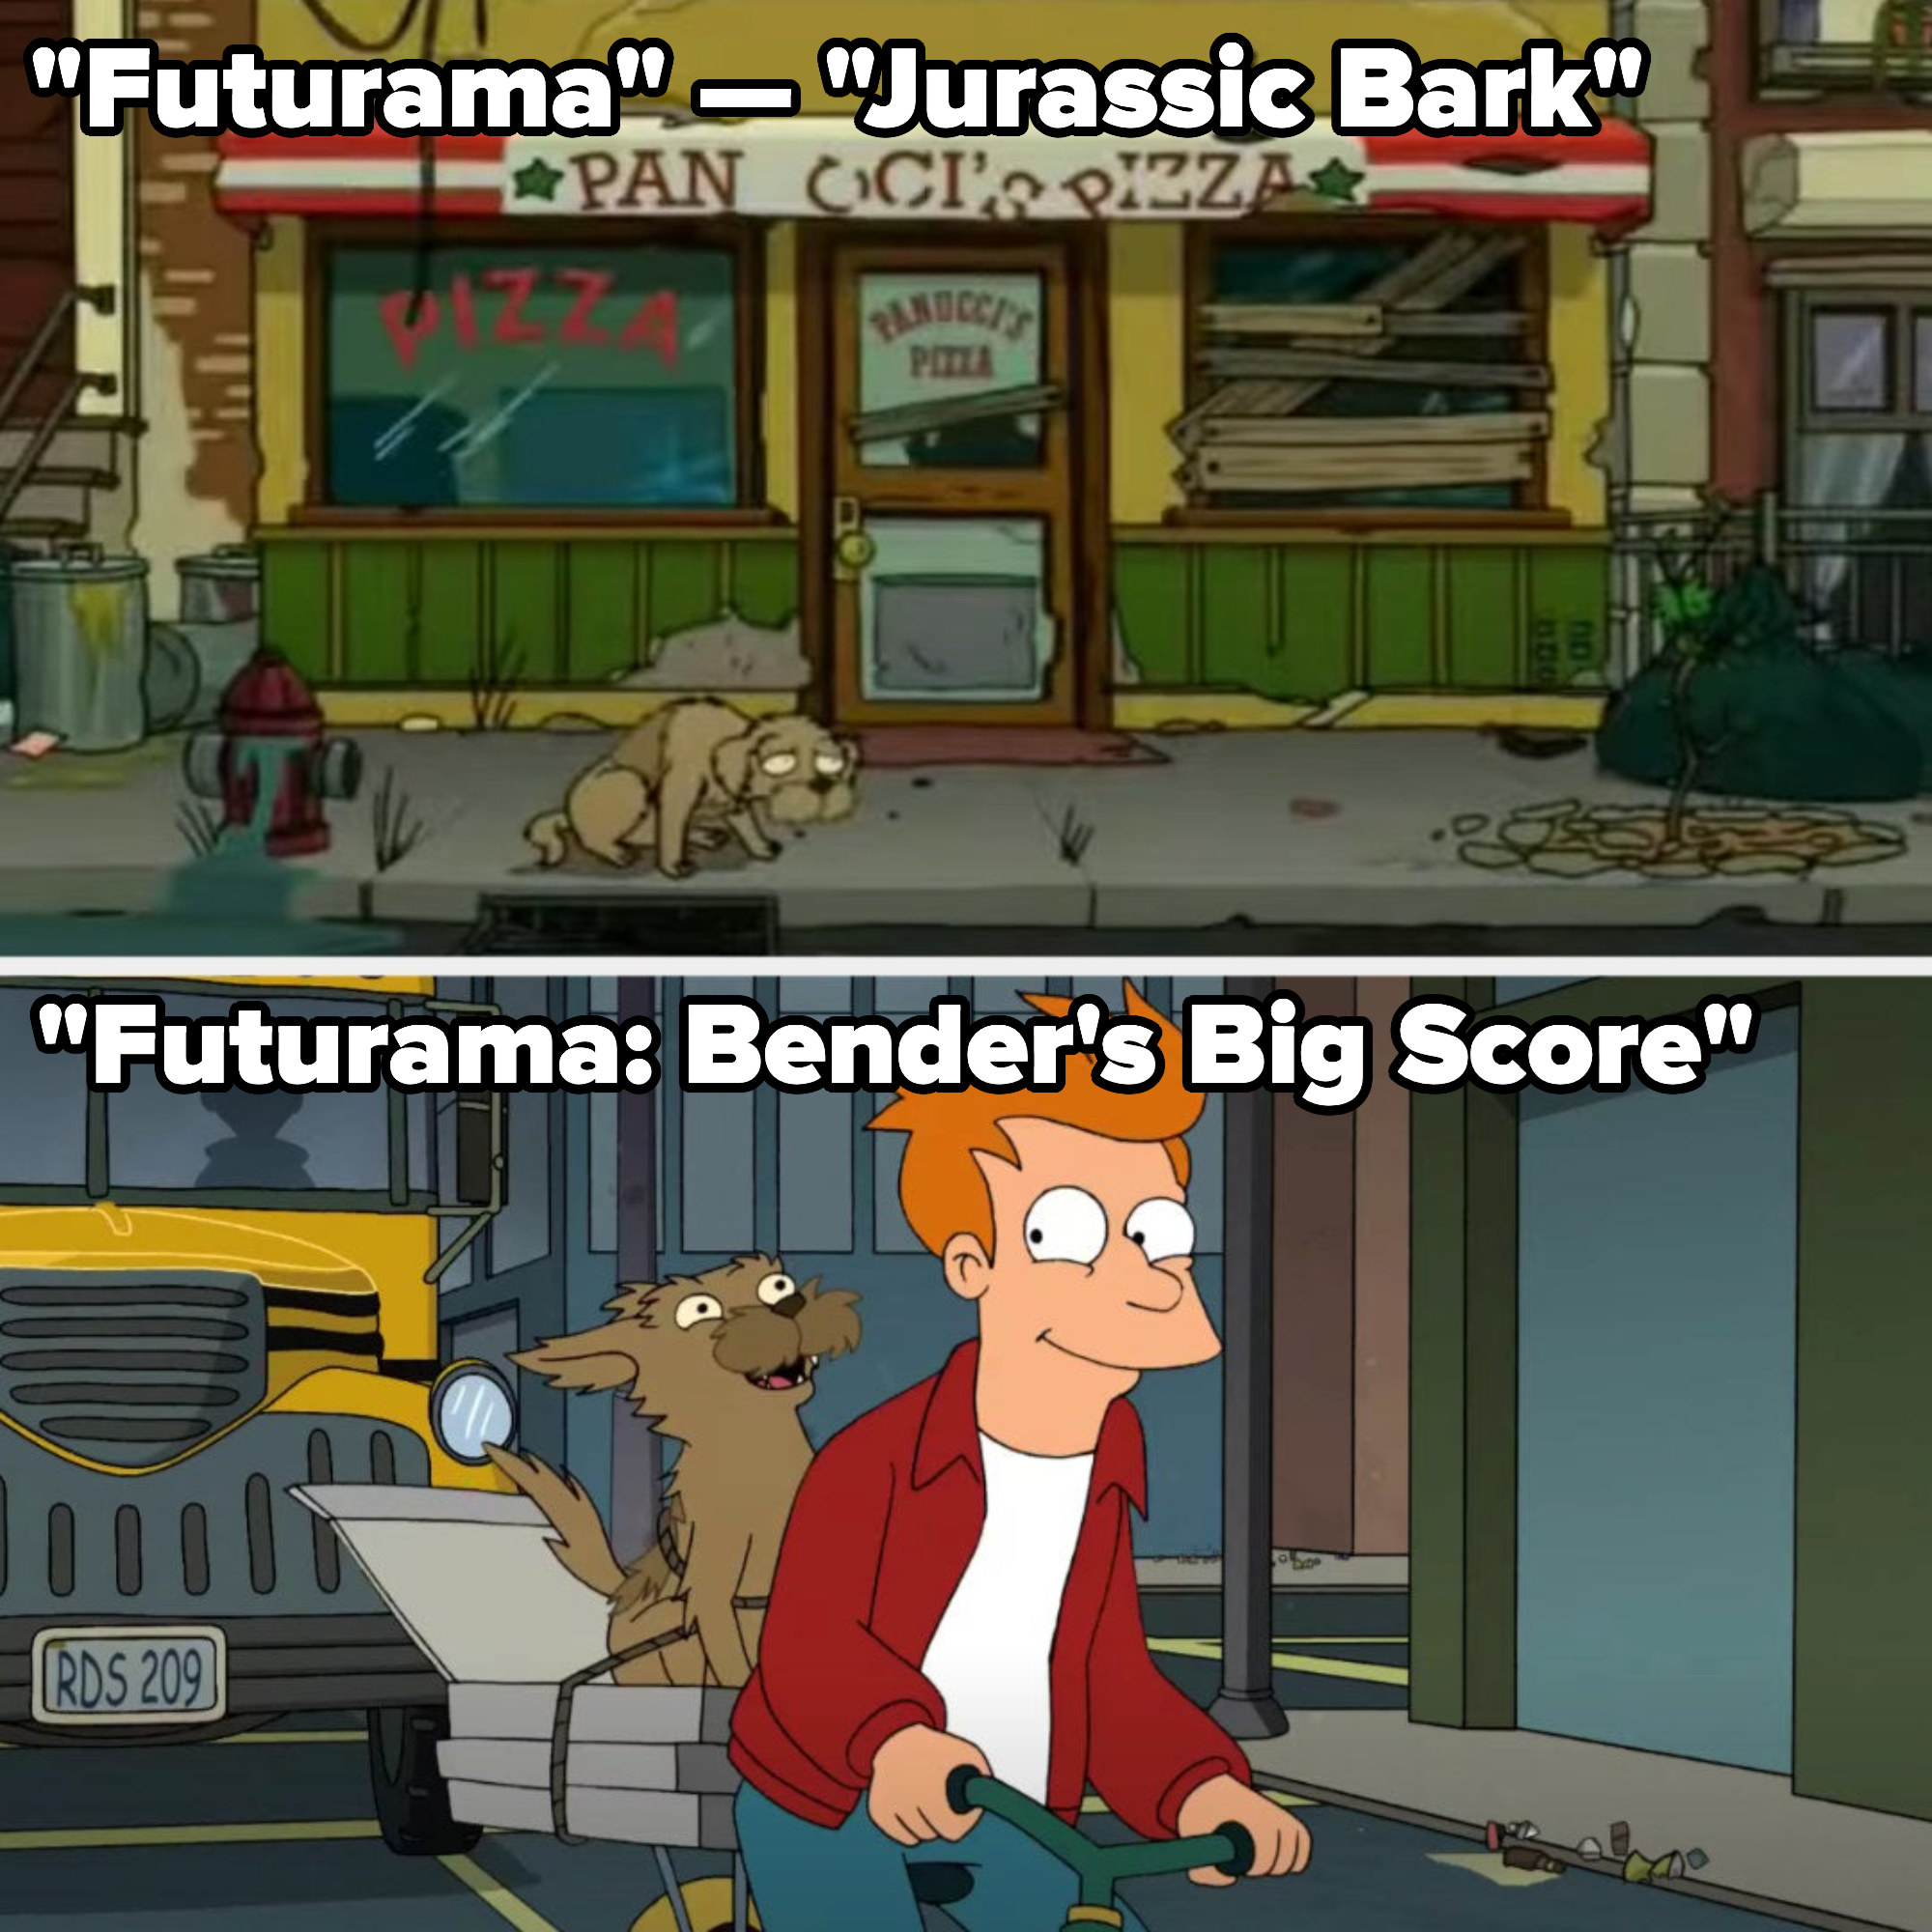 Seymour dying of old age in front of the pizza place in Futurama &quot;Jurassic Bark,&quot; and him with Fry in Futurama: Bender&#x27;s Big Score